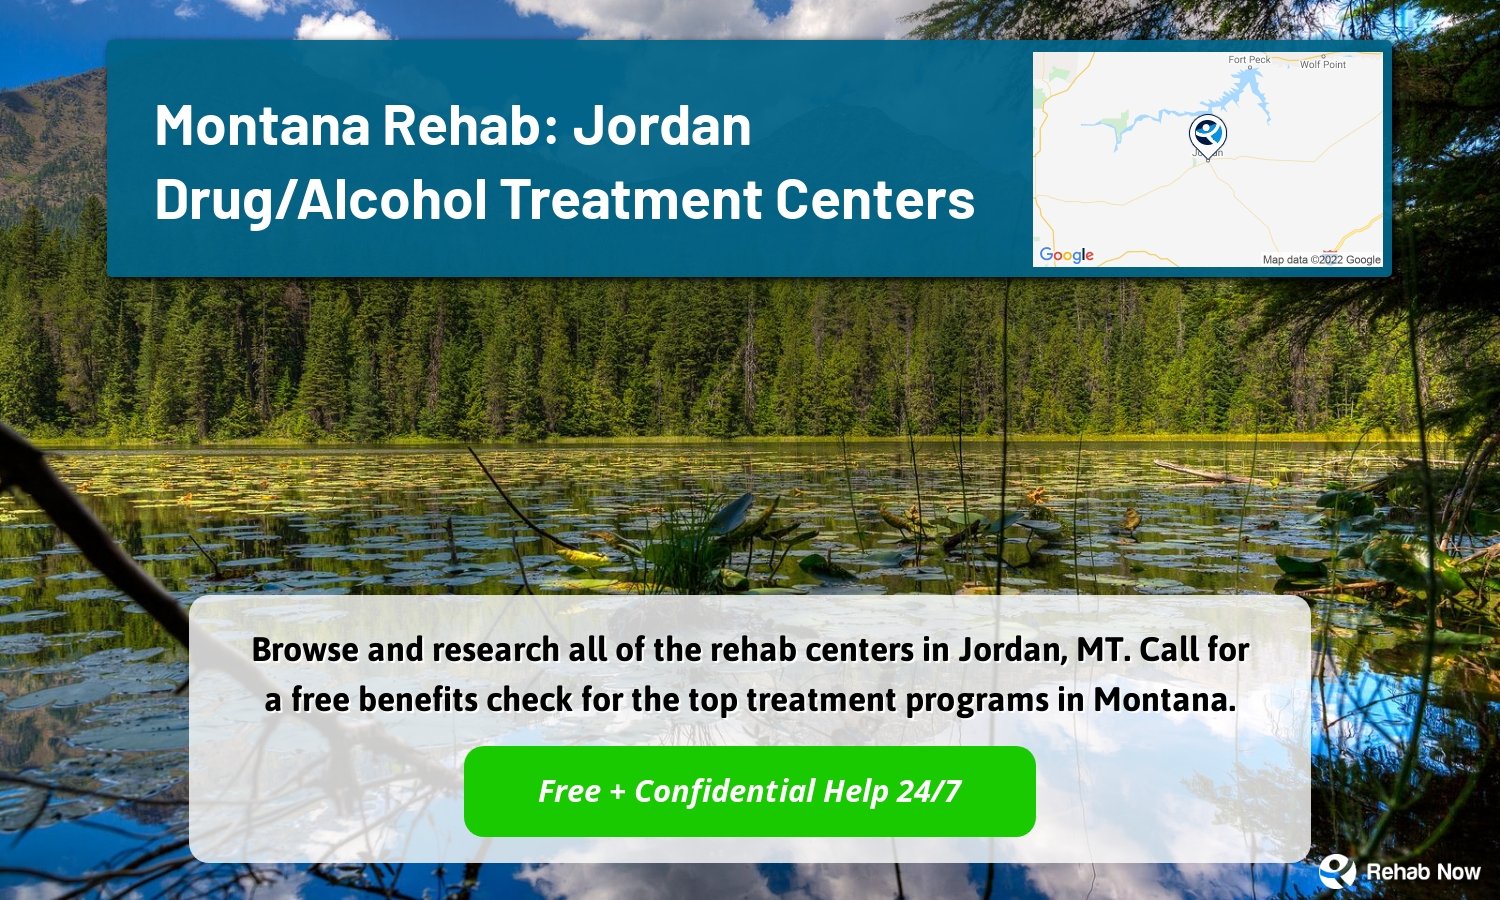 Browse and research all of the rehab centers in Jordan, MT. Call for a free benefits check for the top treatment programs in Montana.